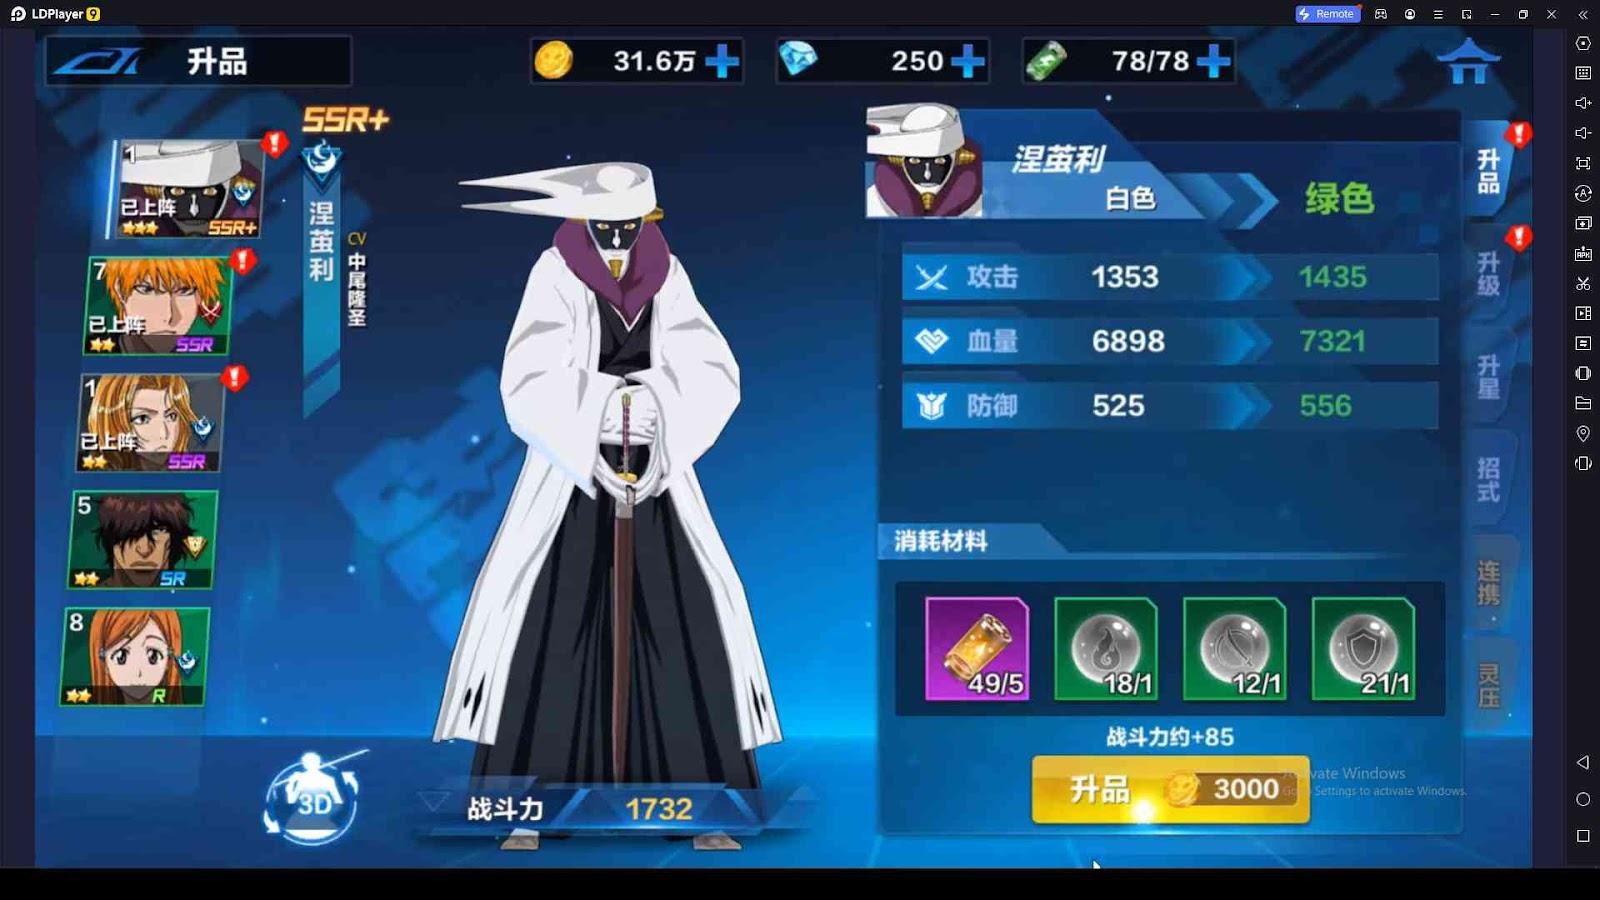 Character Progression System in BLEACH: Soul Reaper